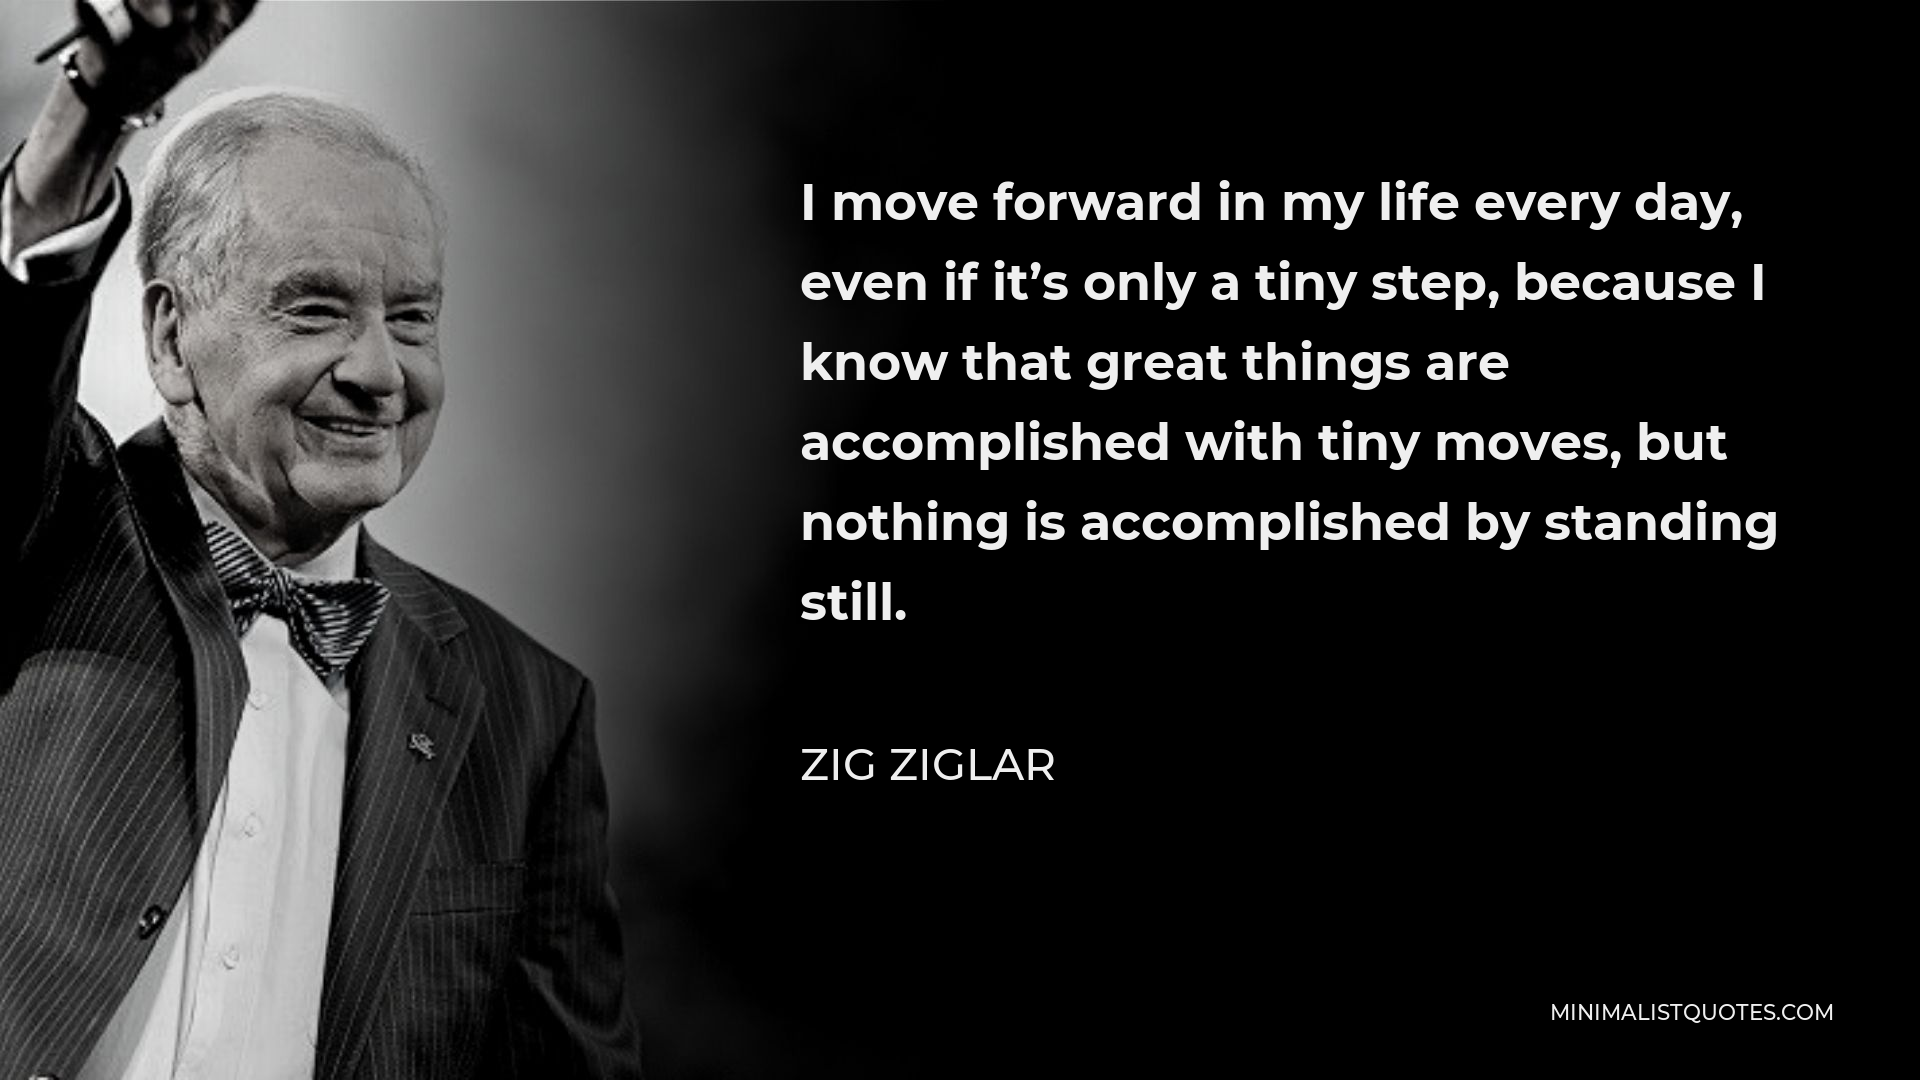 Zig Ziglar Quote - I move forward in my life every day, even if it’s only a tiny step, because I know that great things are accomplished with tiny moves, but nothing is accomplished by standing still.